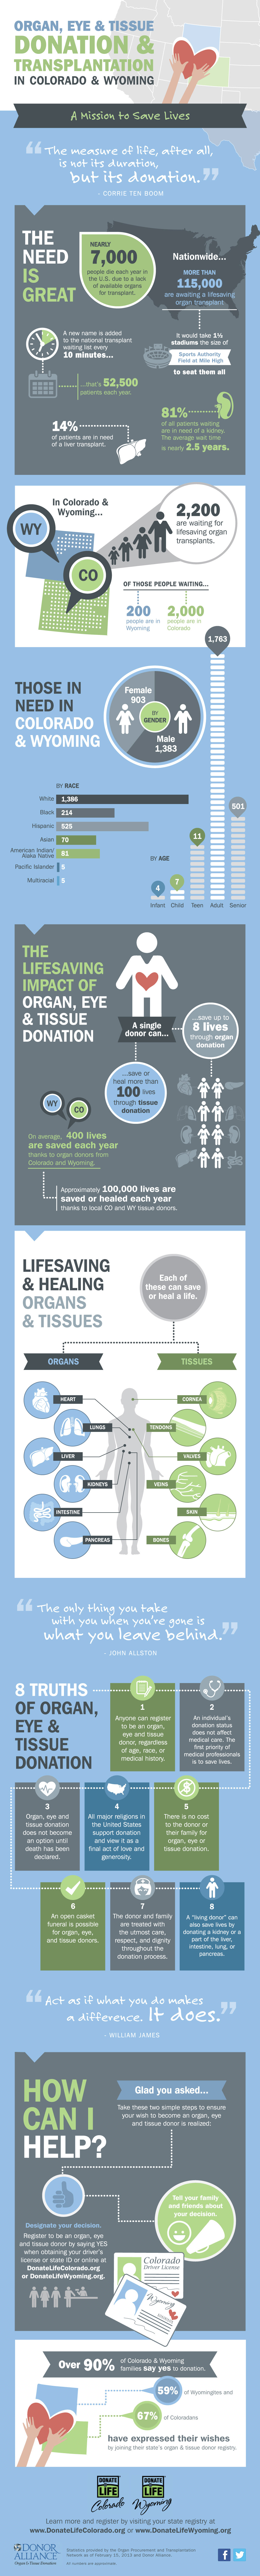 donor alliance Transplant donation infographic